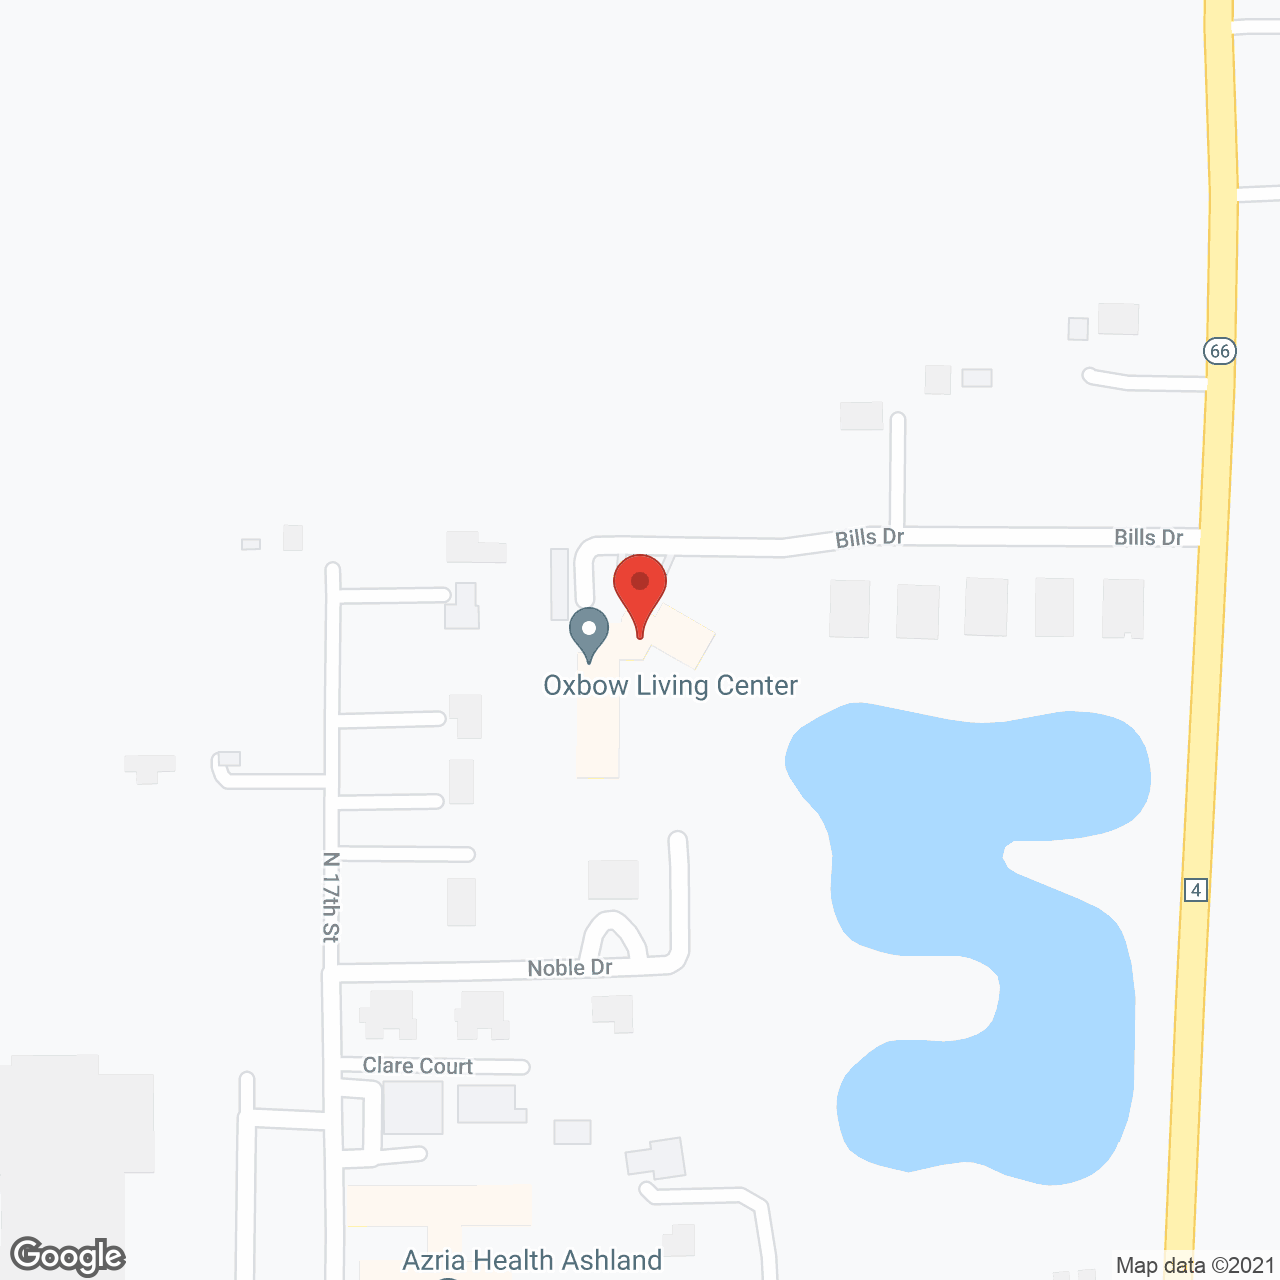 Oxbow Living Center in google map